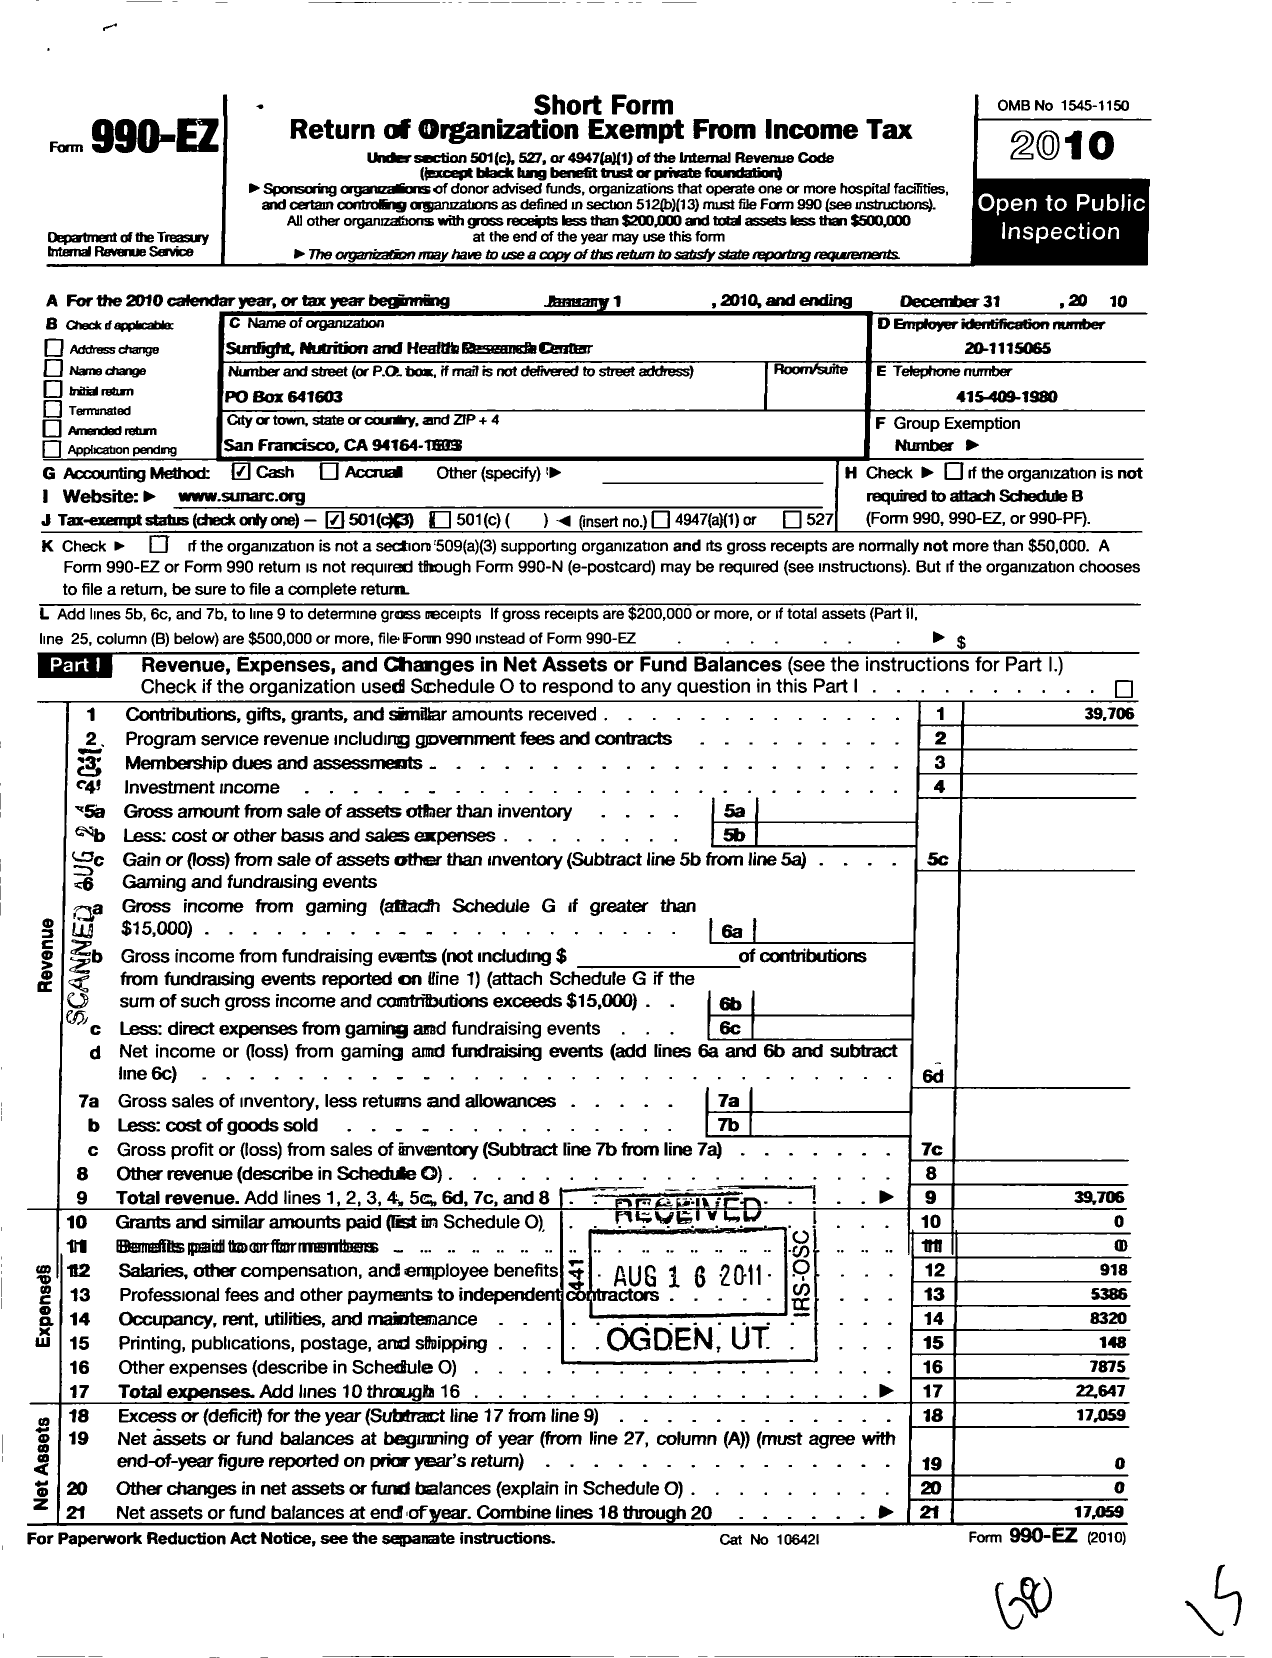 Image of first page of 2010 Form 990EZ for Sunlight Nutrition and Health Research Center